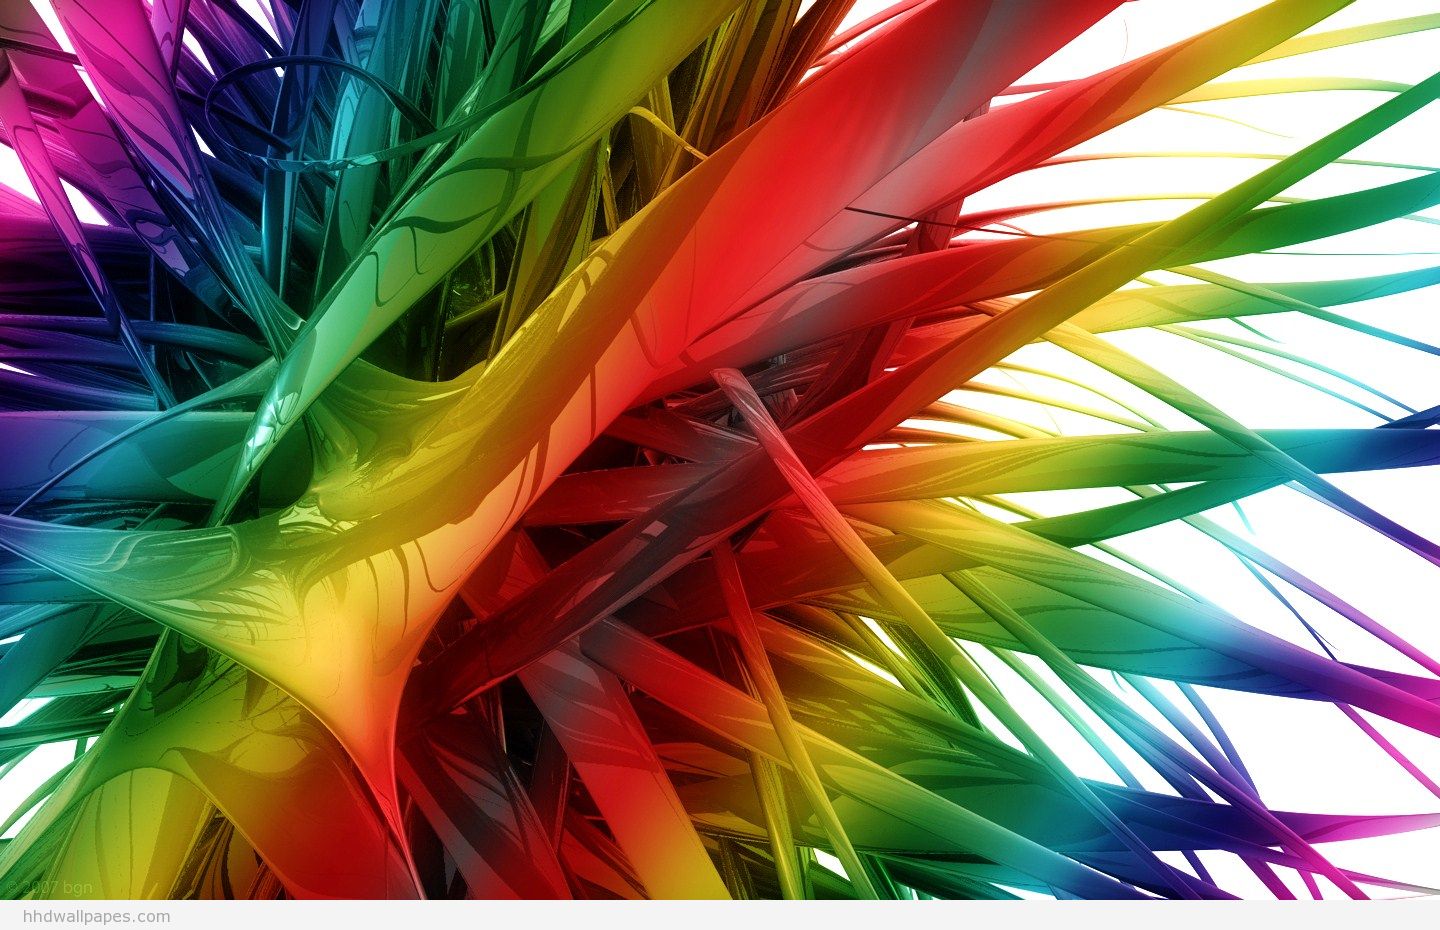 Awesome Colors Cool Wallpaper Share This On